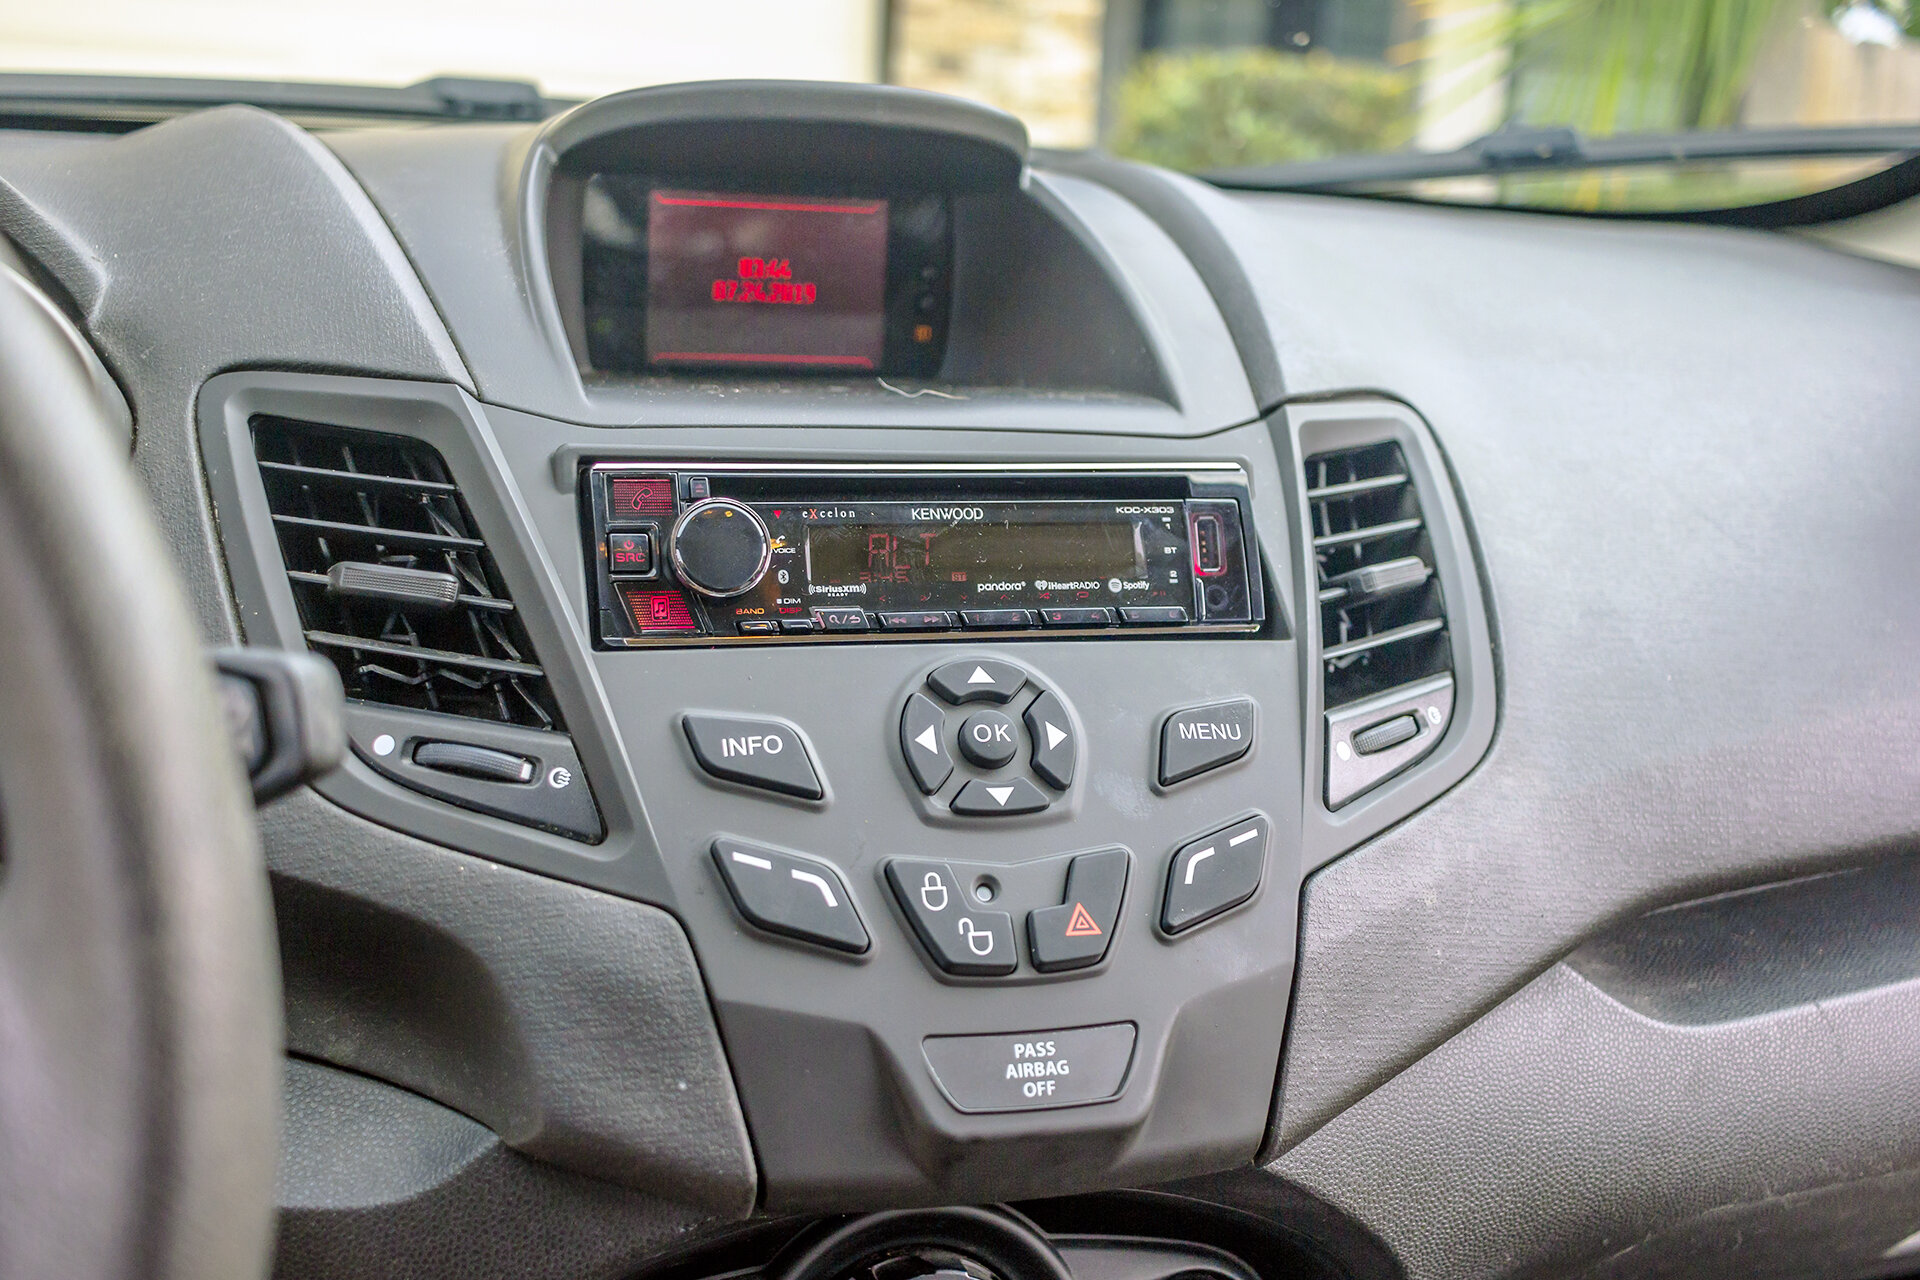 We replaced the faulty factory radio in this 2012 Ford Focus